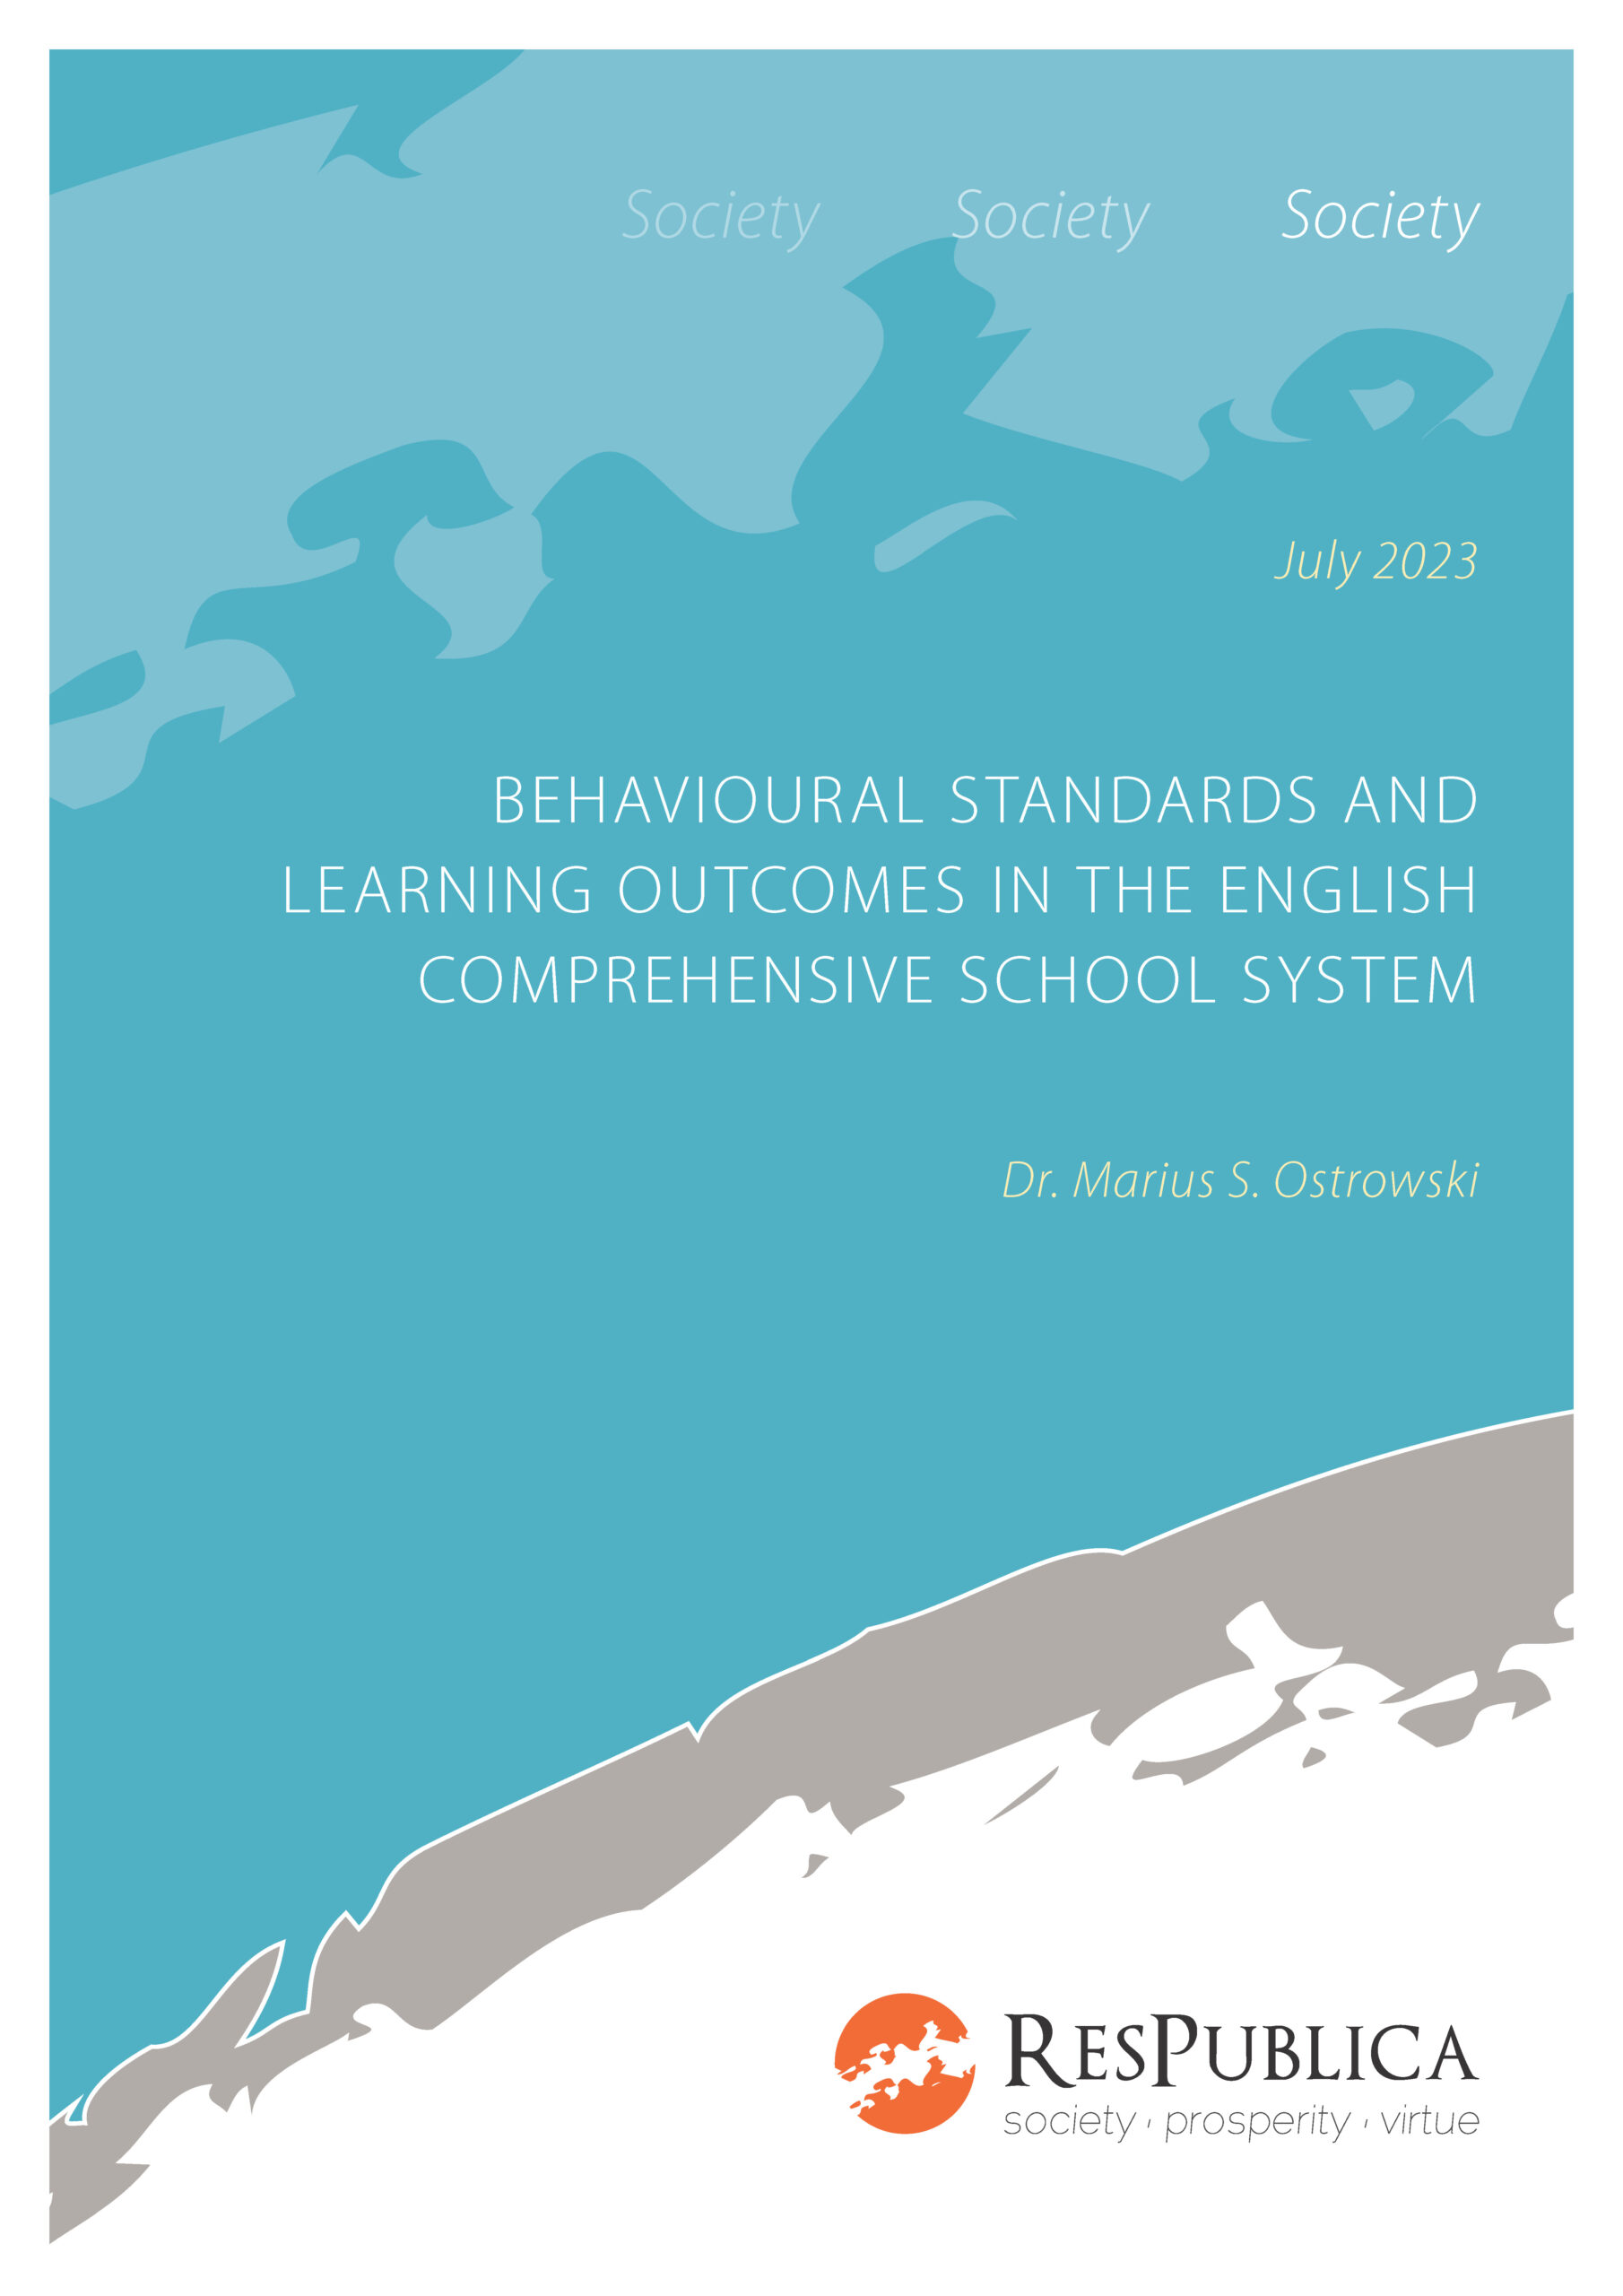 Behavioural Standards and Learning Outcomes in the English Comprehensive School System